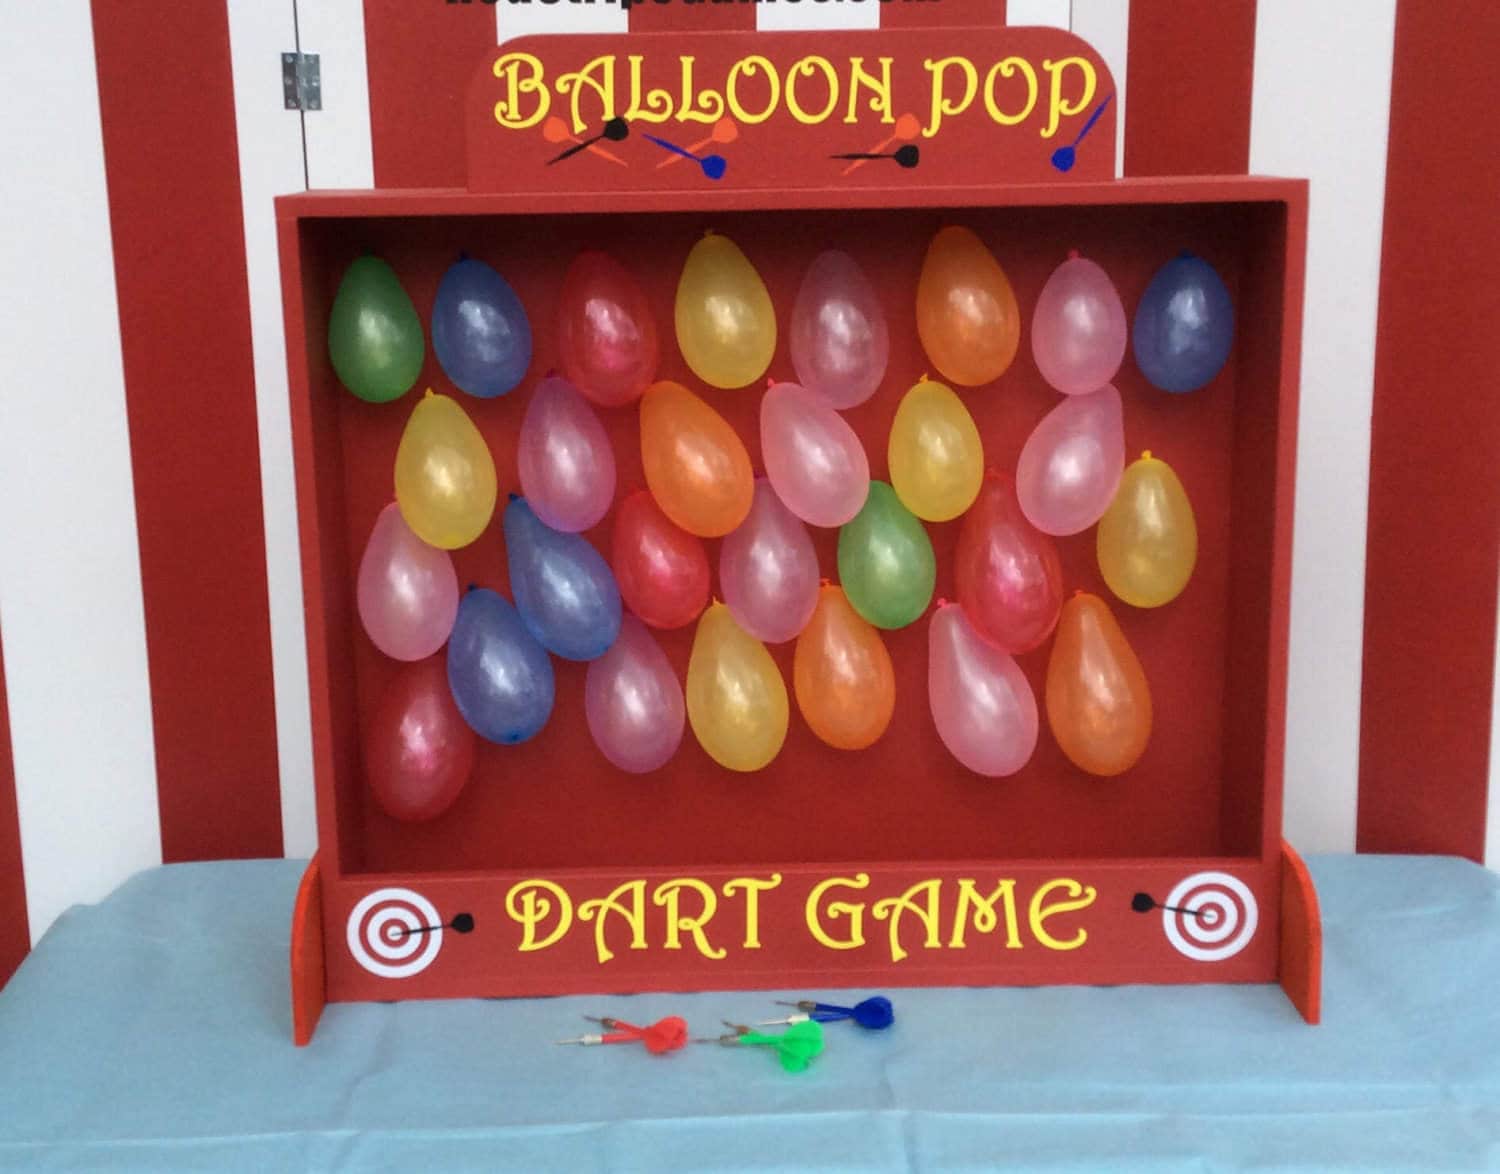 Funny Whack a Balloon Game Pop The Balloon Game,Party Games